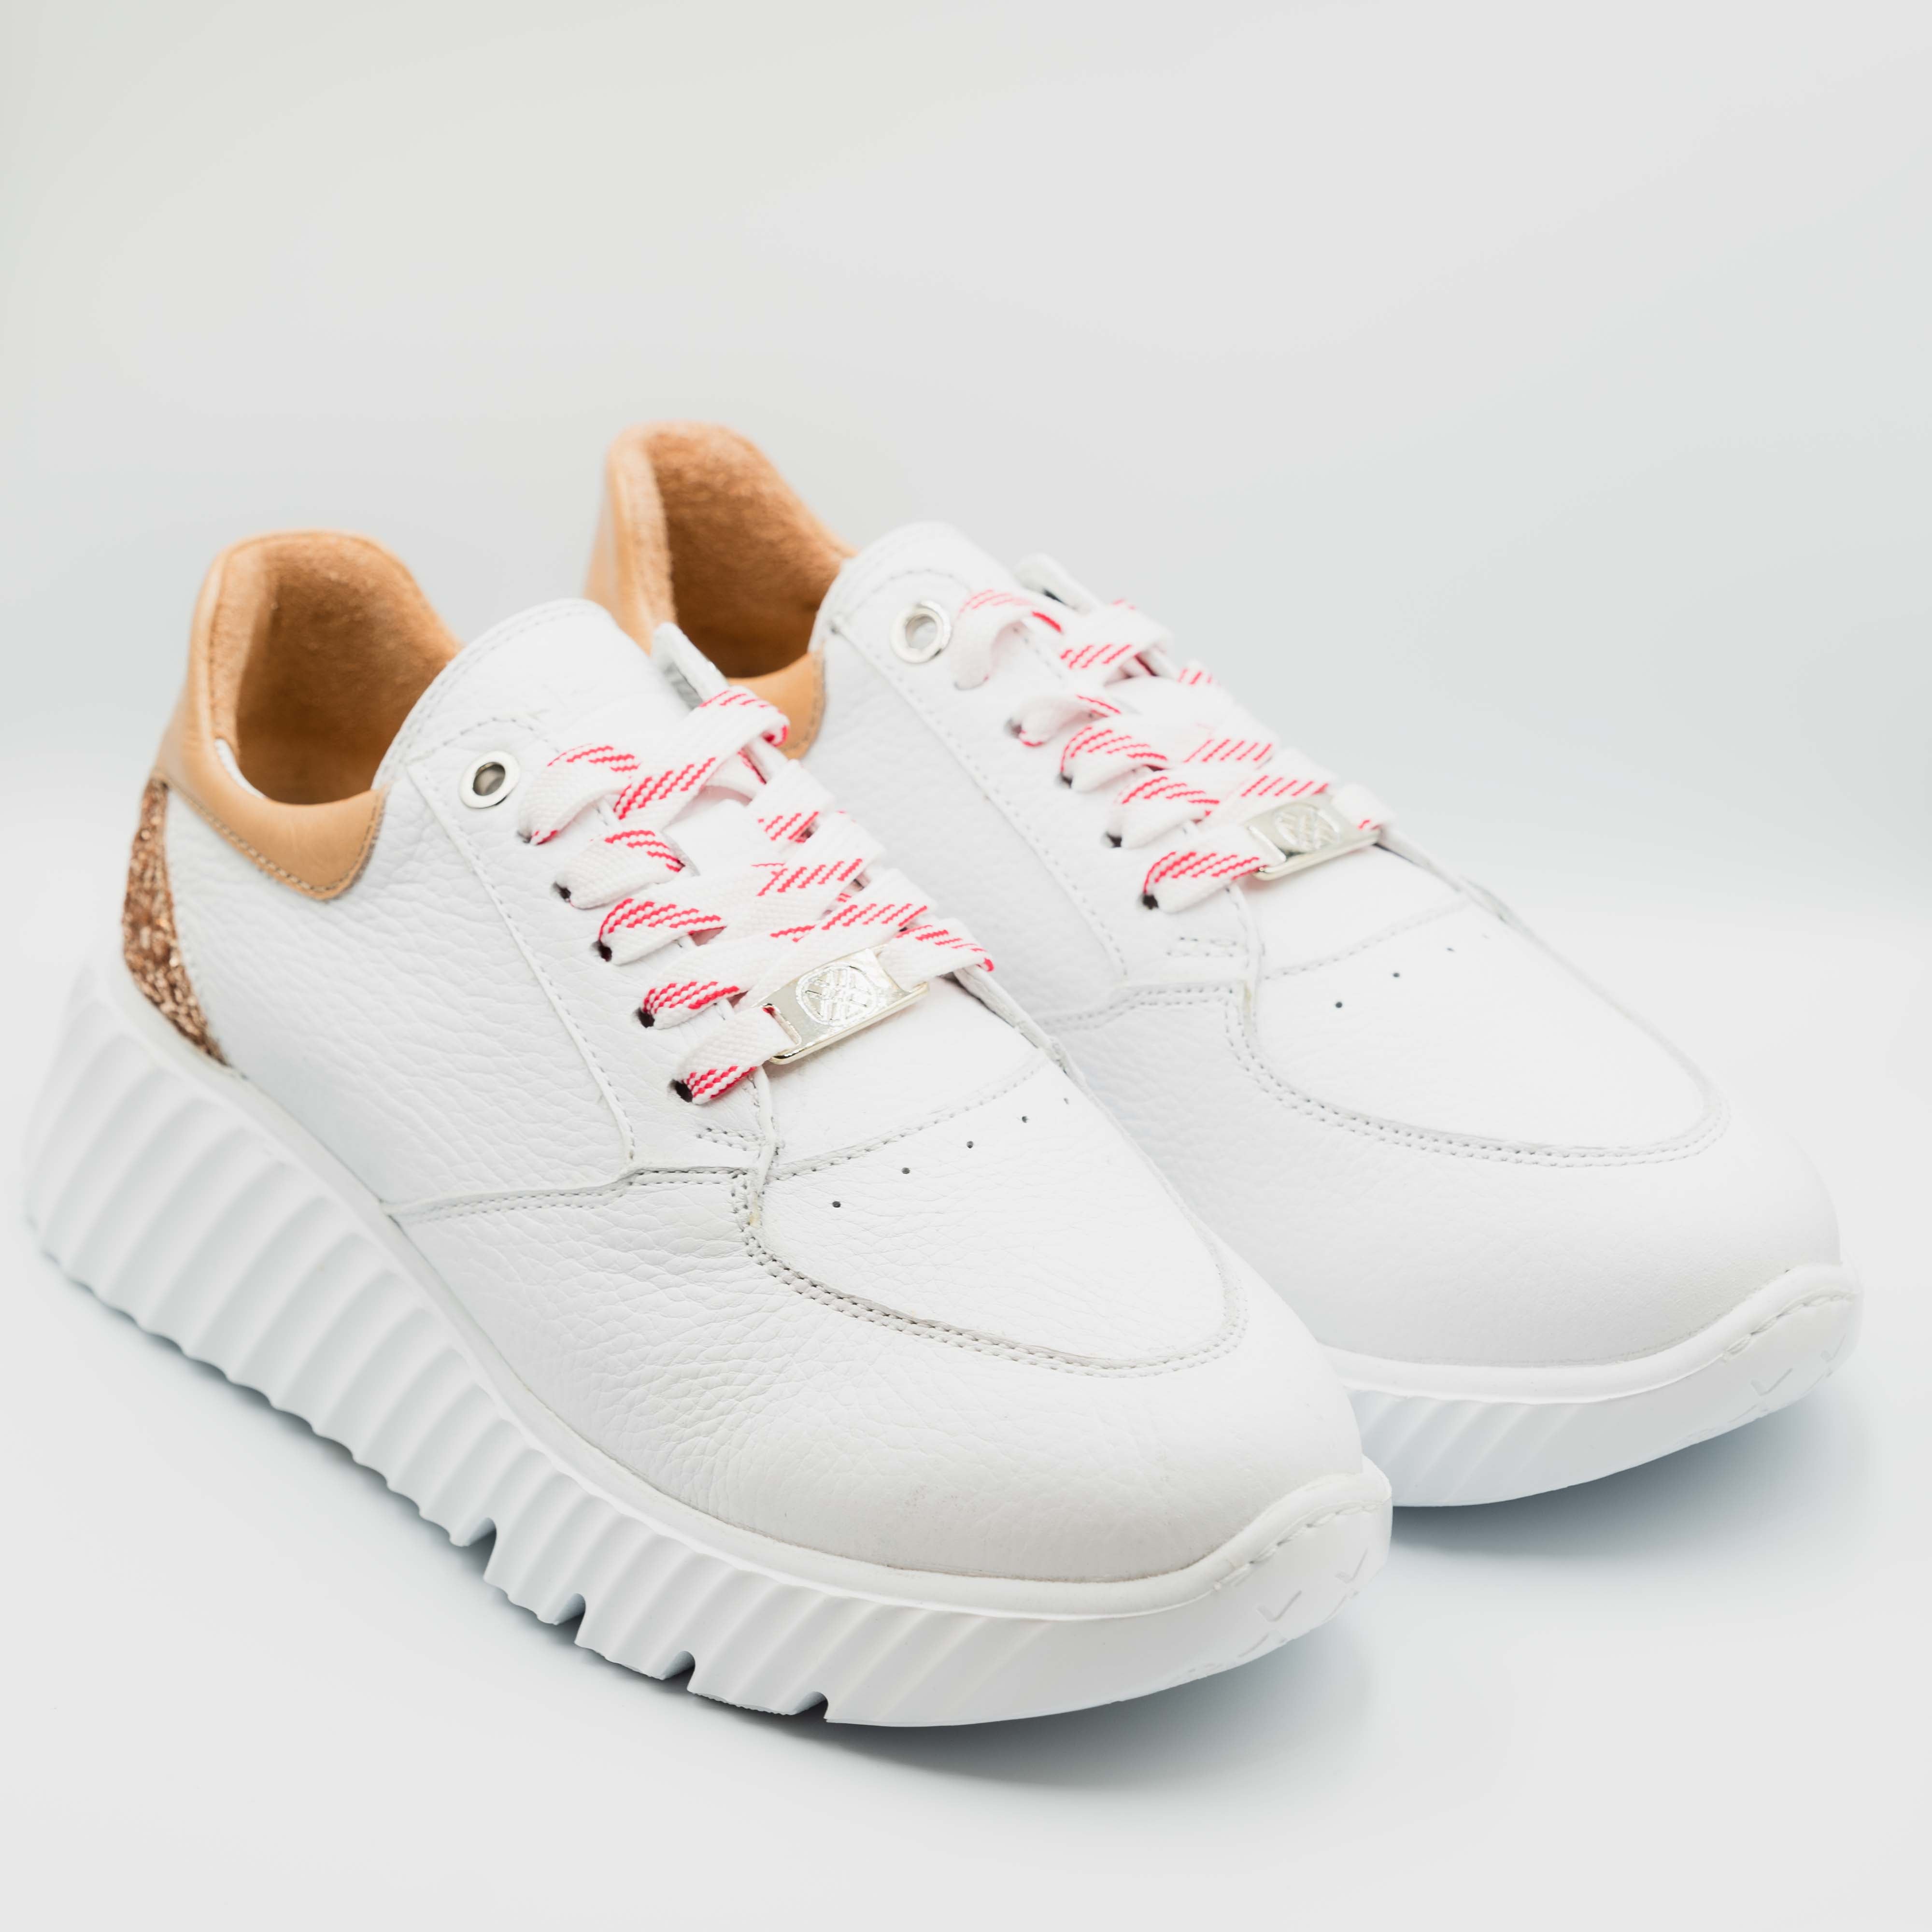 Unisa - Sneakers in pelle bianche e rame